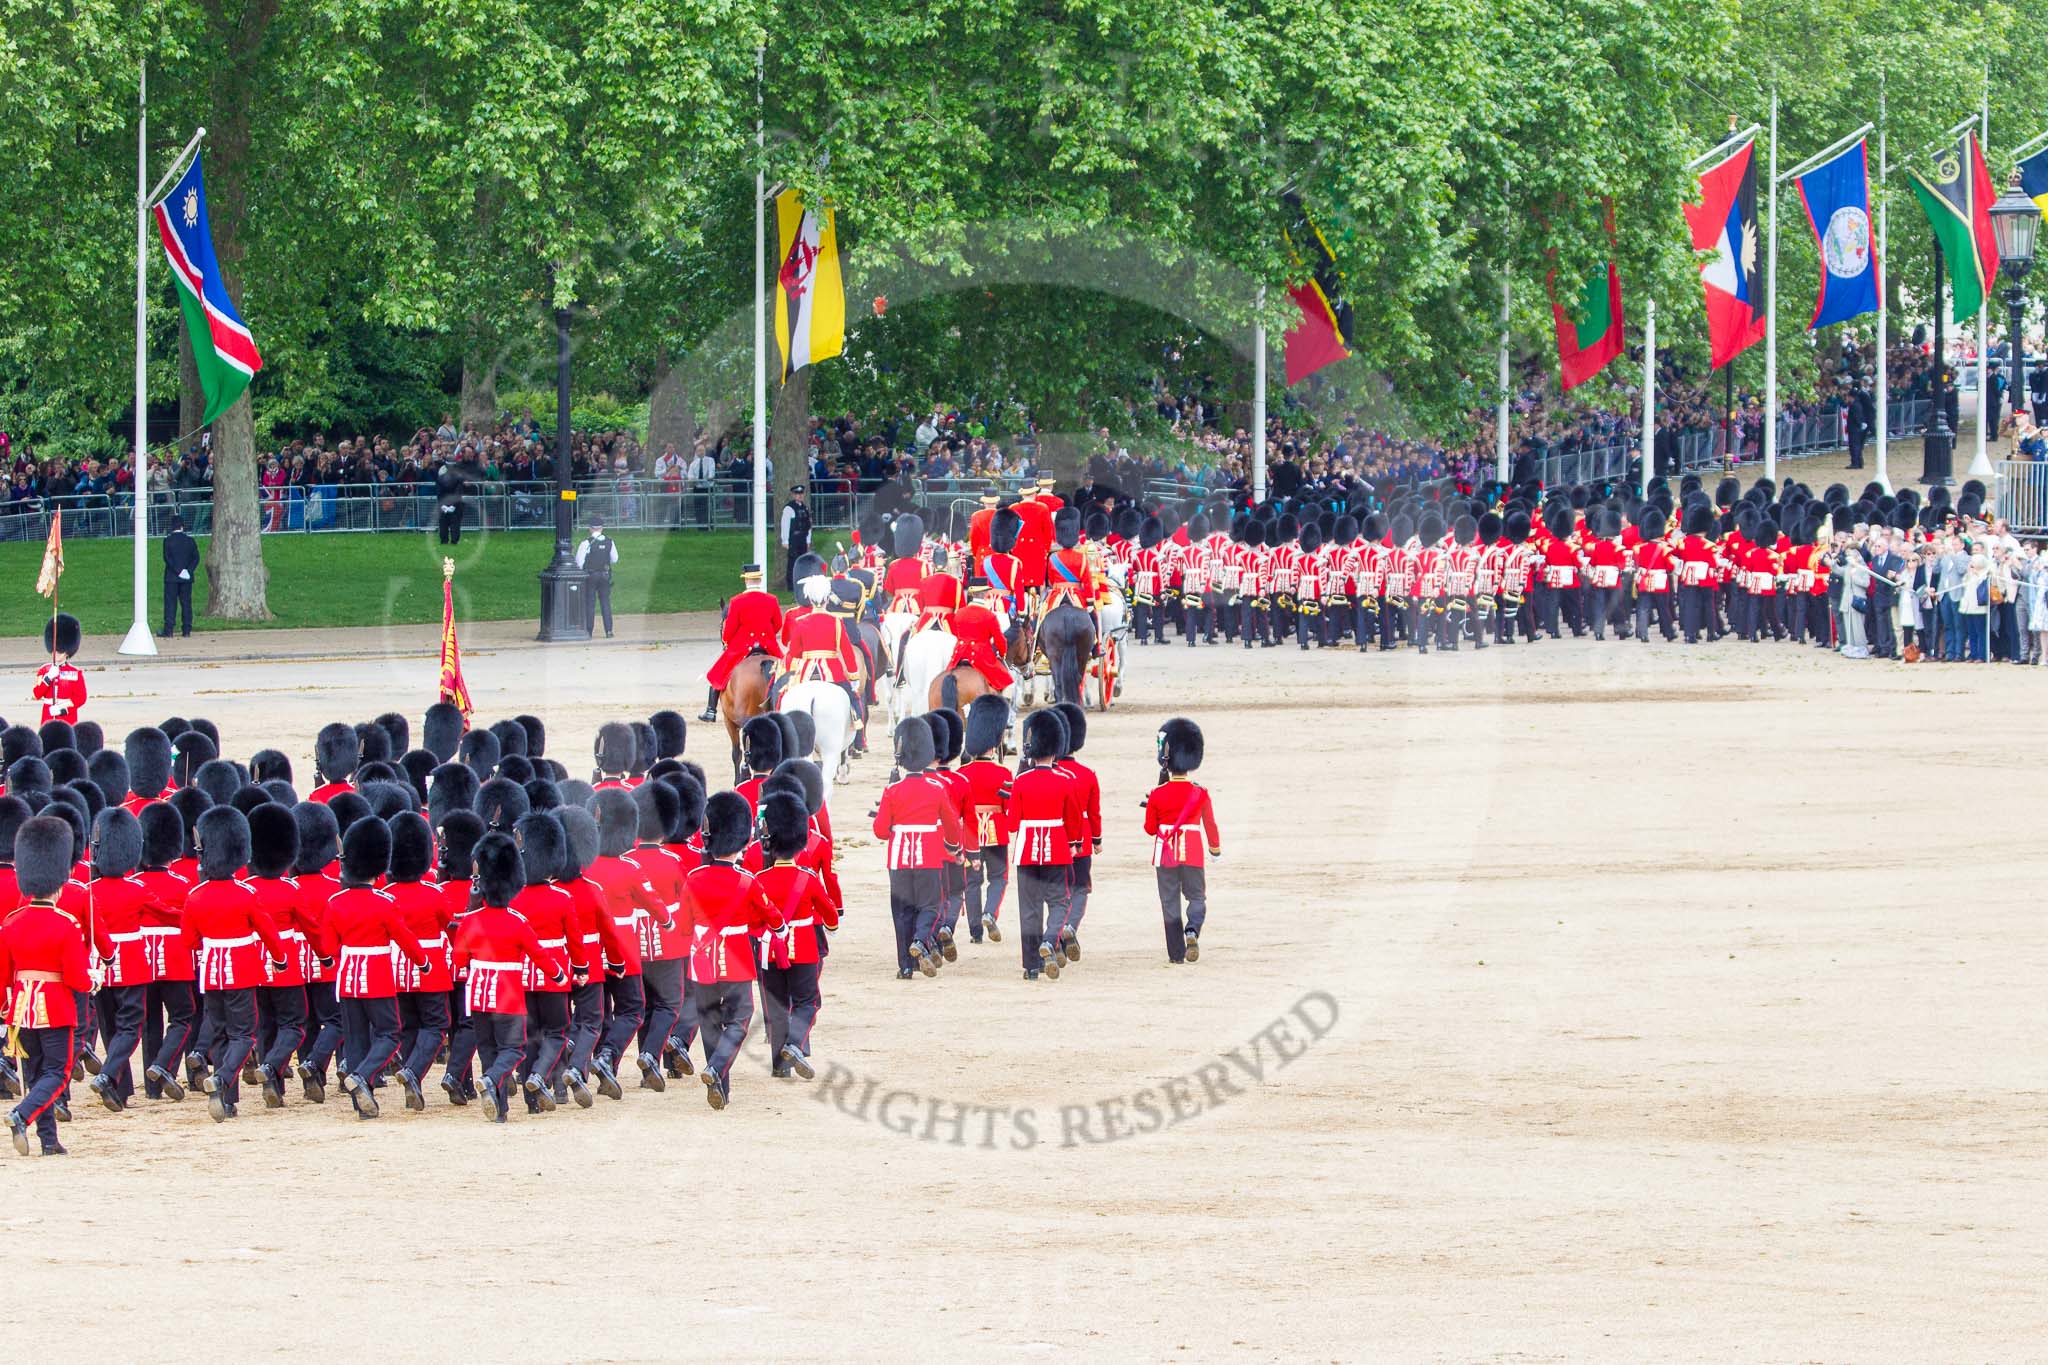 Trooping the Colour 2013: The March Off - the Massed Bands are leaving towards The Mall, followed by the glass coach carrying HM The Queen and HRH The Duke of Kent. Behind members of the Royal Procession, followed by No. 1 Guard, carrying the Colour. Image #845, 15 June 2013 12:12 Horse Guards Parade, London, UK